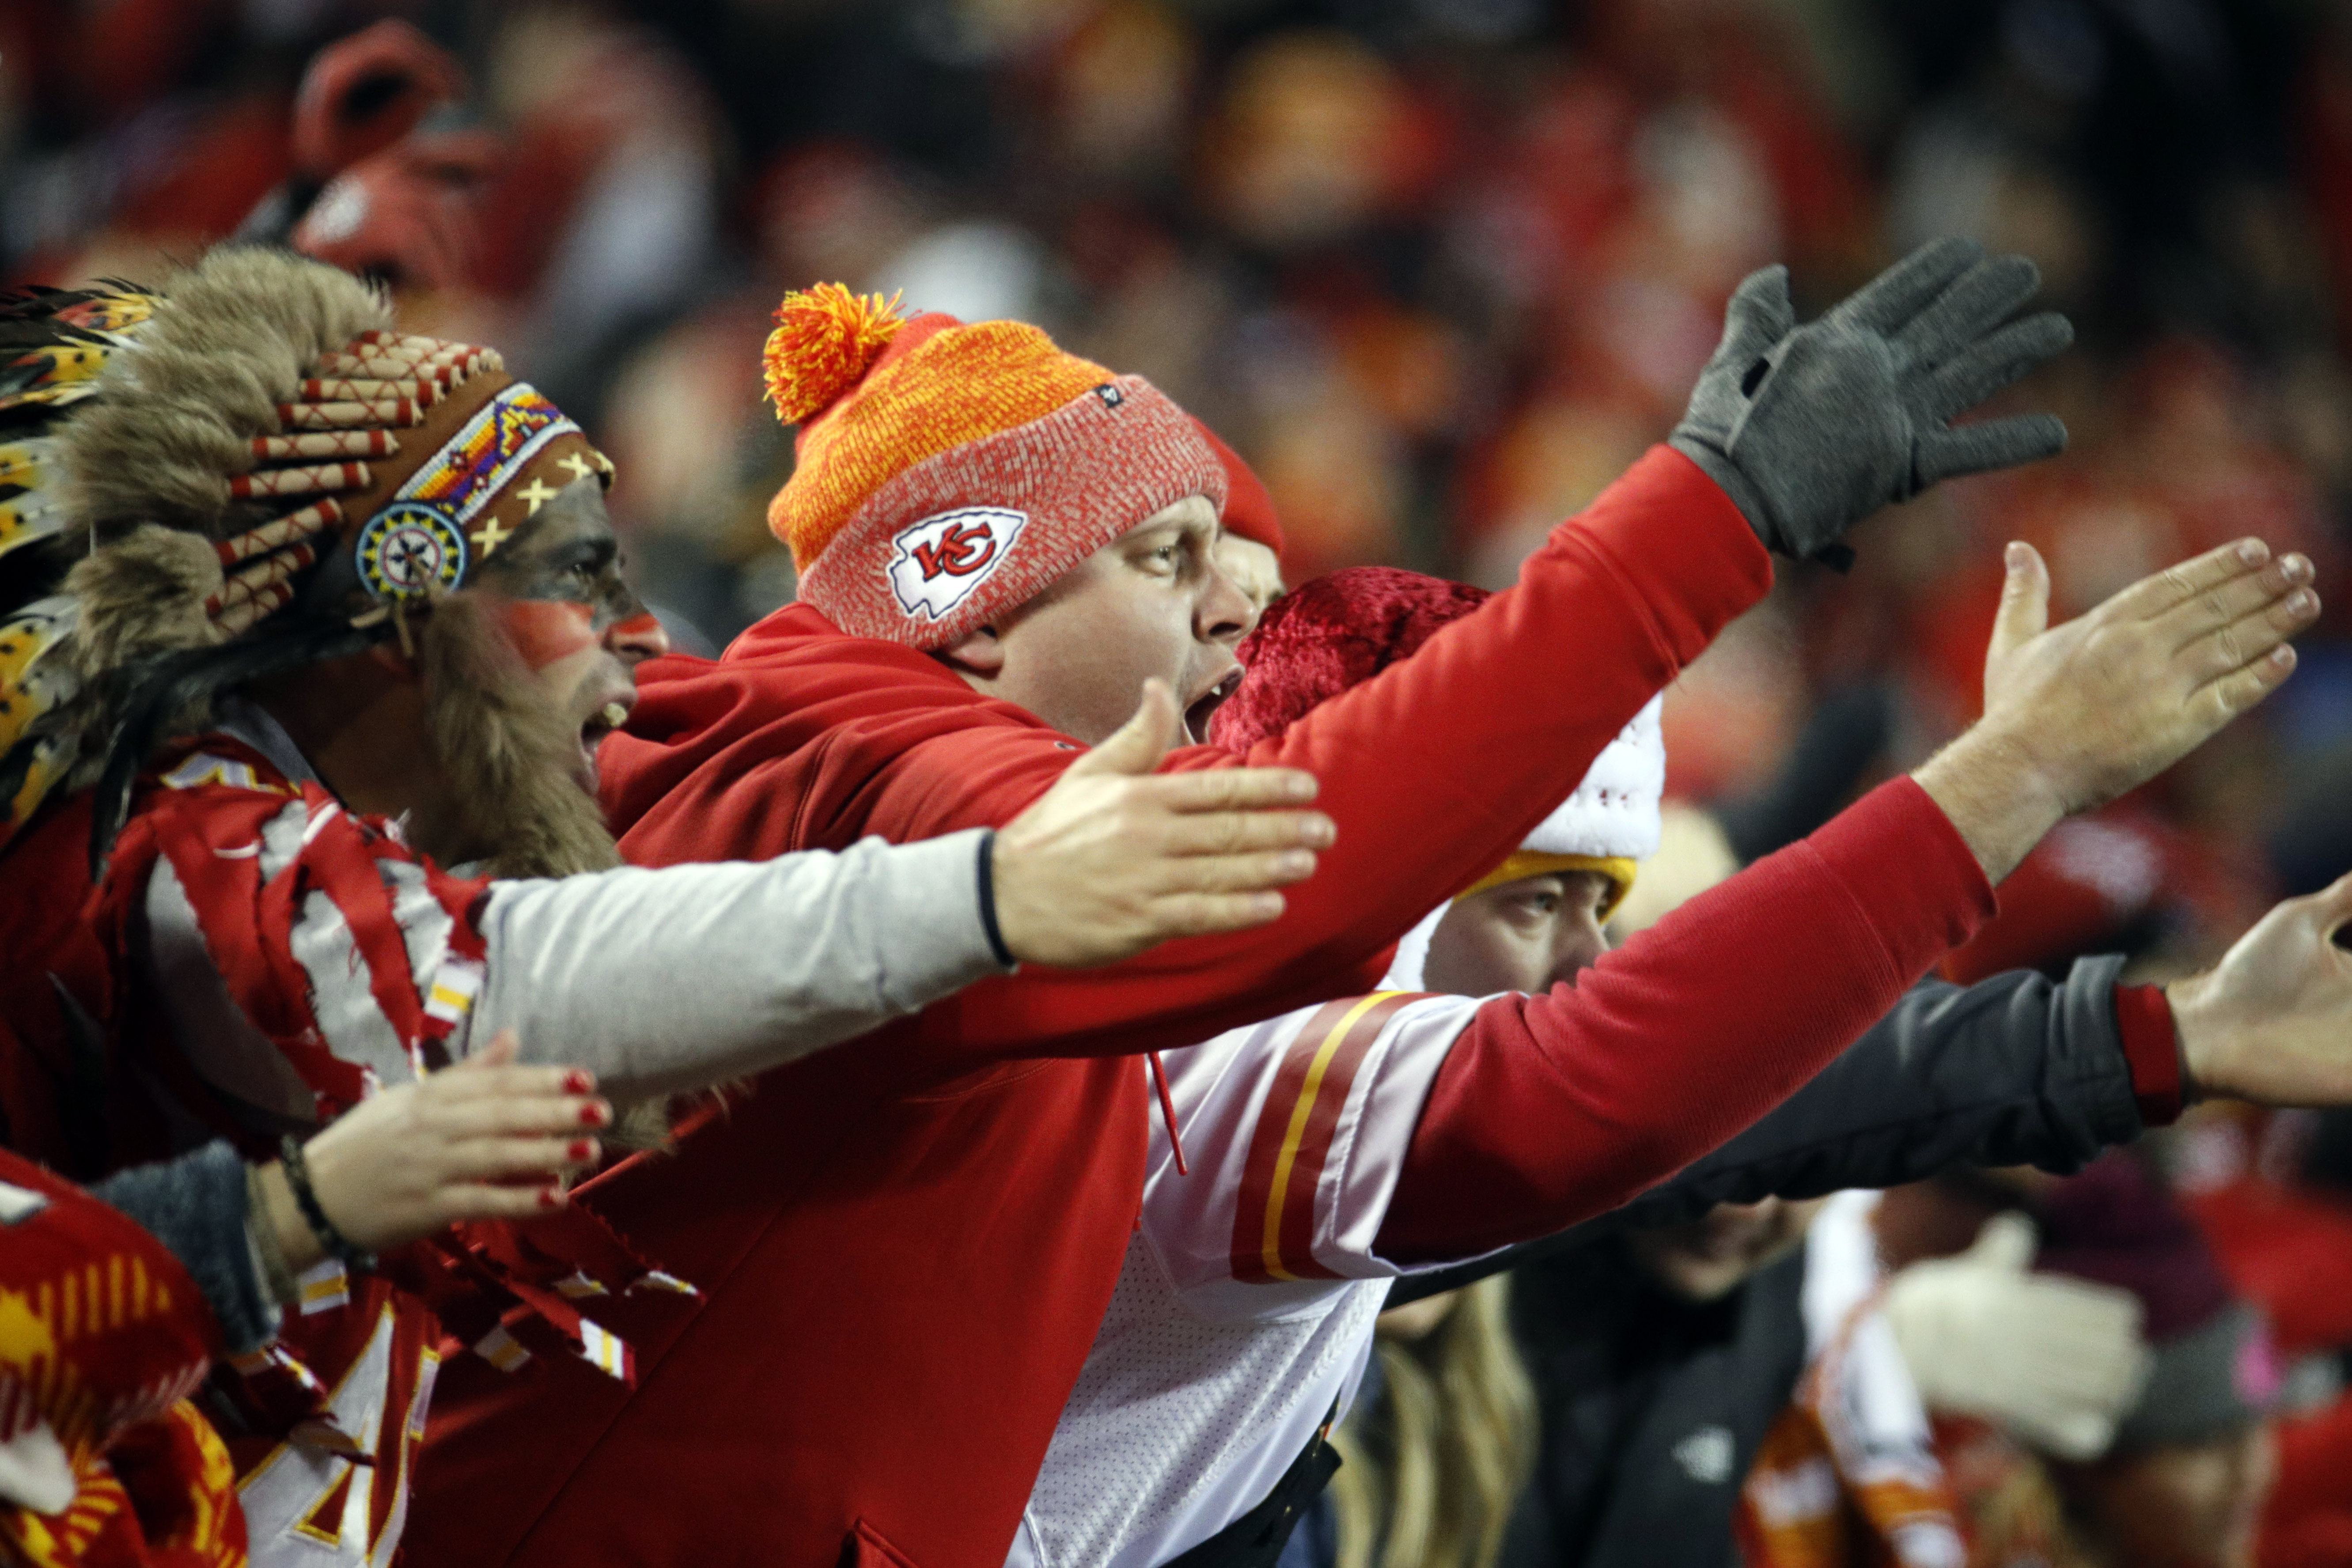 Native Americans push for Chiefs to abandon name, mascot, 'tomahawk chop' 